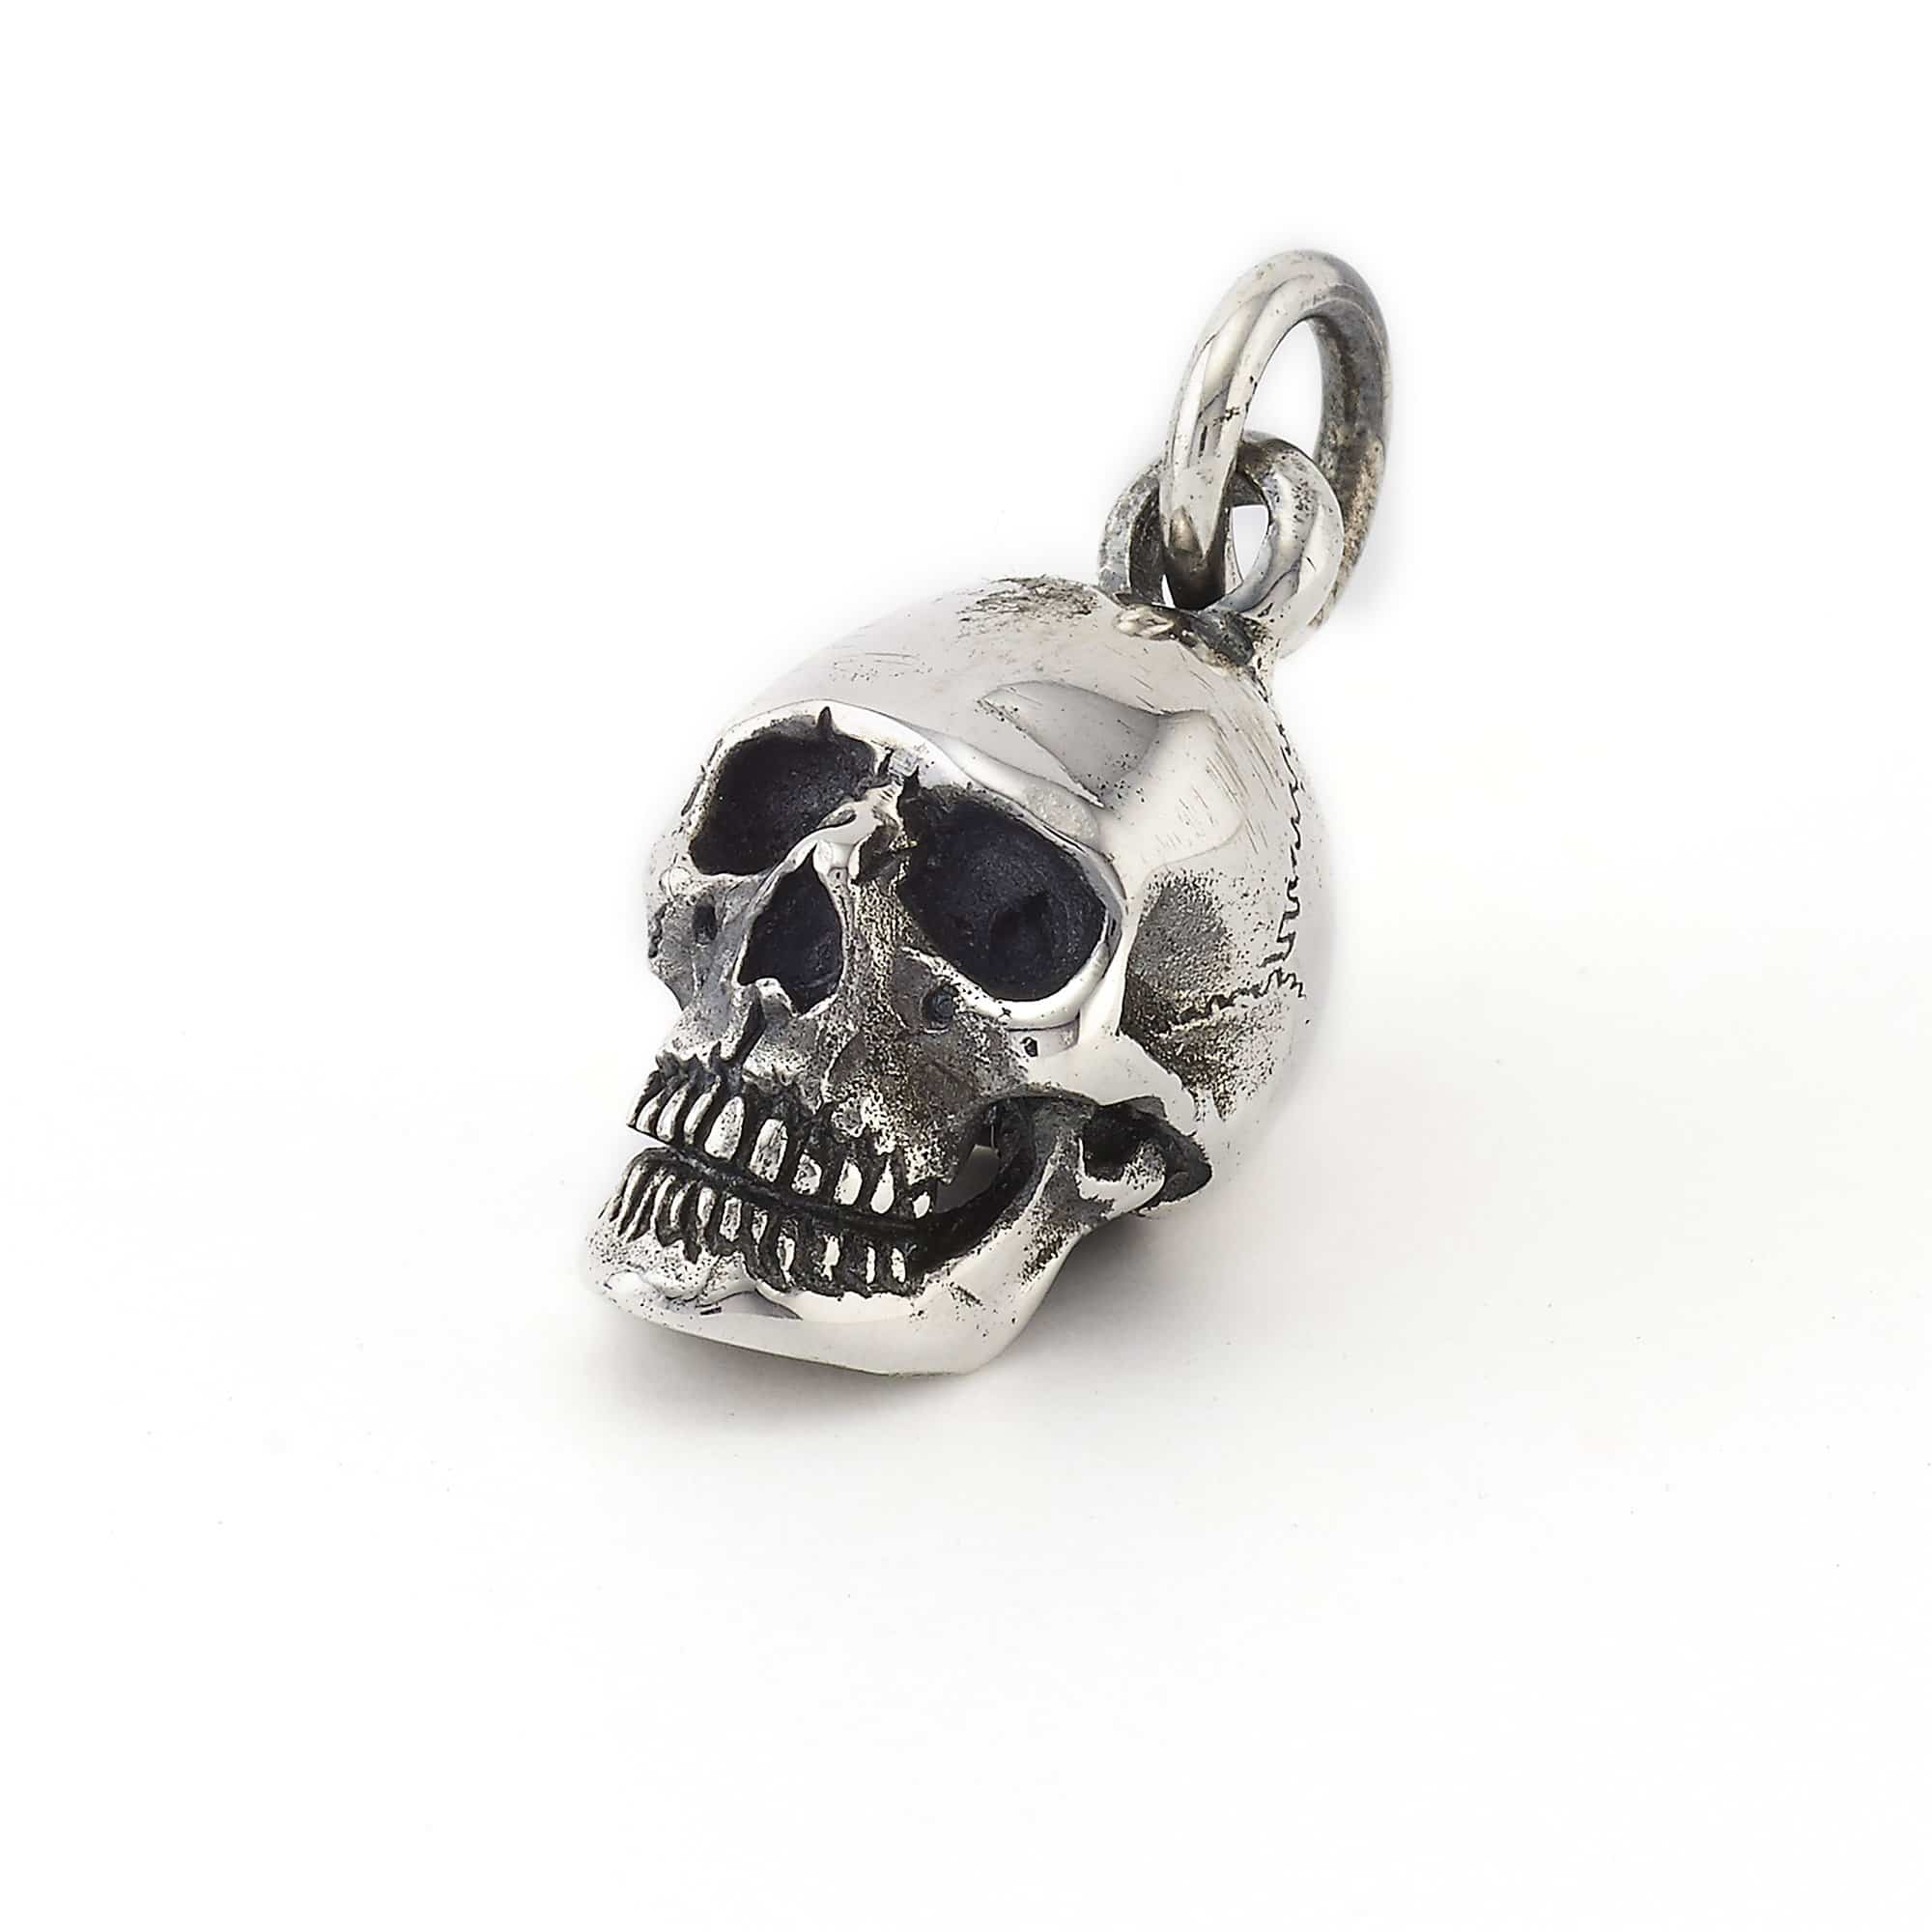 Small Anatomical Skull Pendant [suitable for chain] - The Great Frog